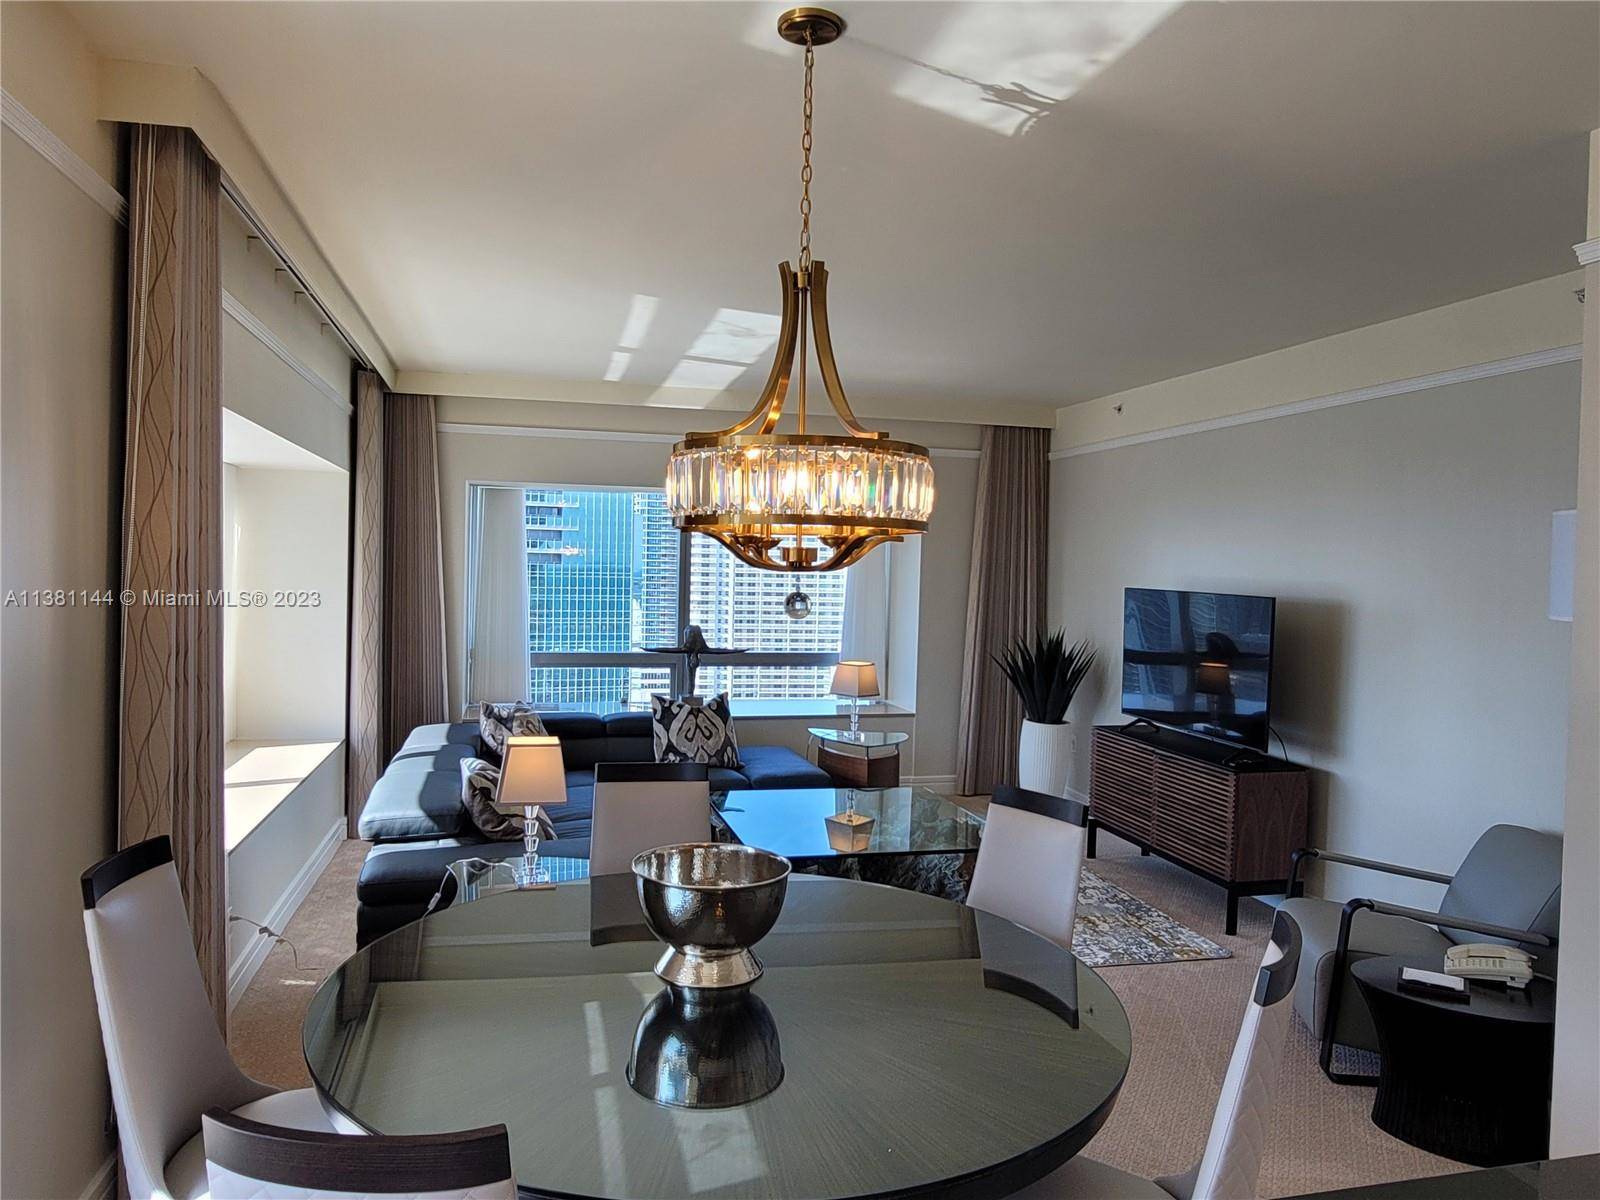 NEWLEY UPGRADED FELEXIBLE SHORT TERM RENTAL AVAILABLE AT THE LUXURY 5 STAR FOURSEASONS CONDO HOTEL.